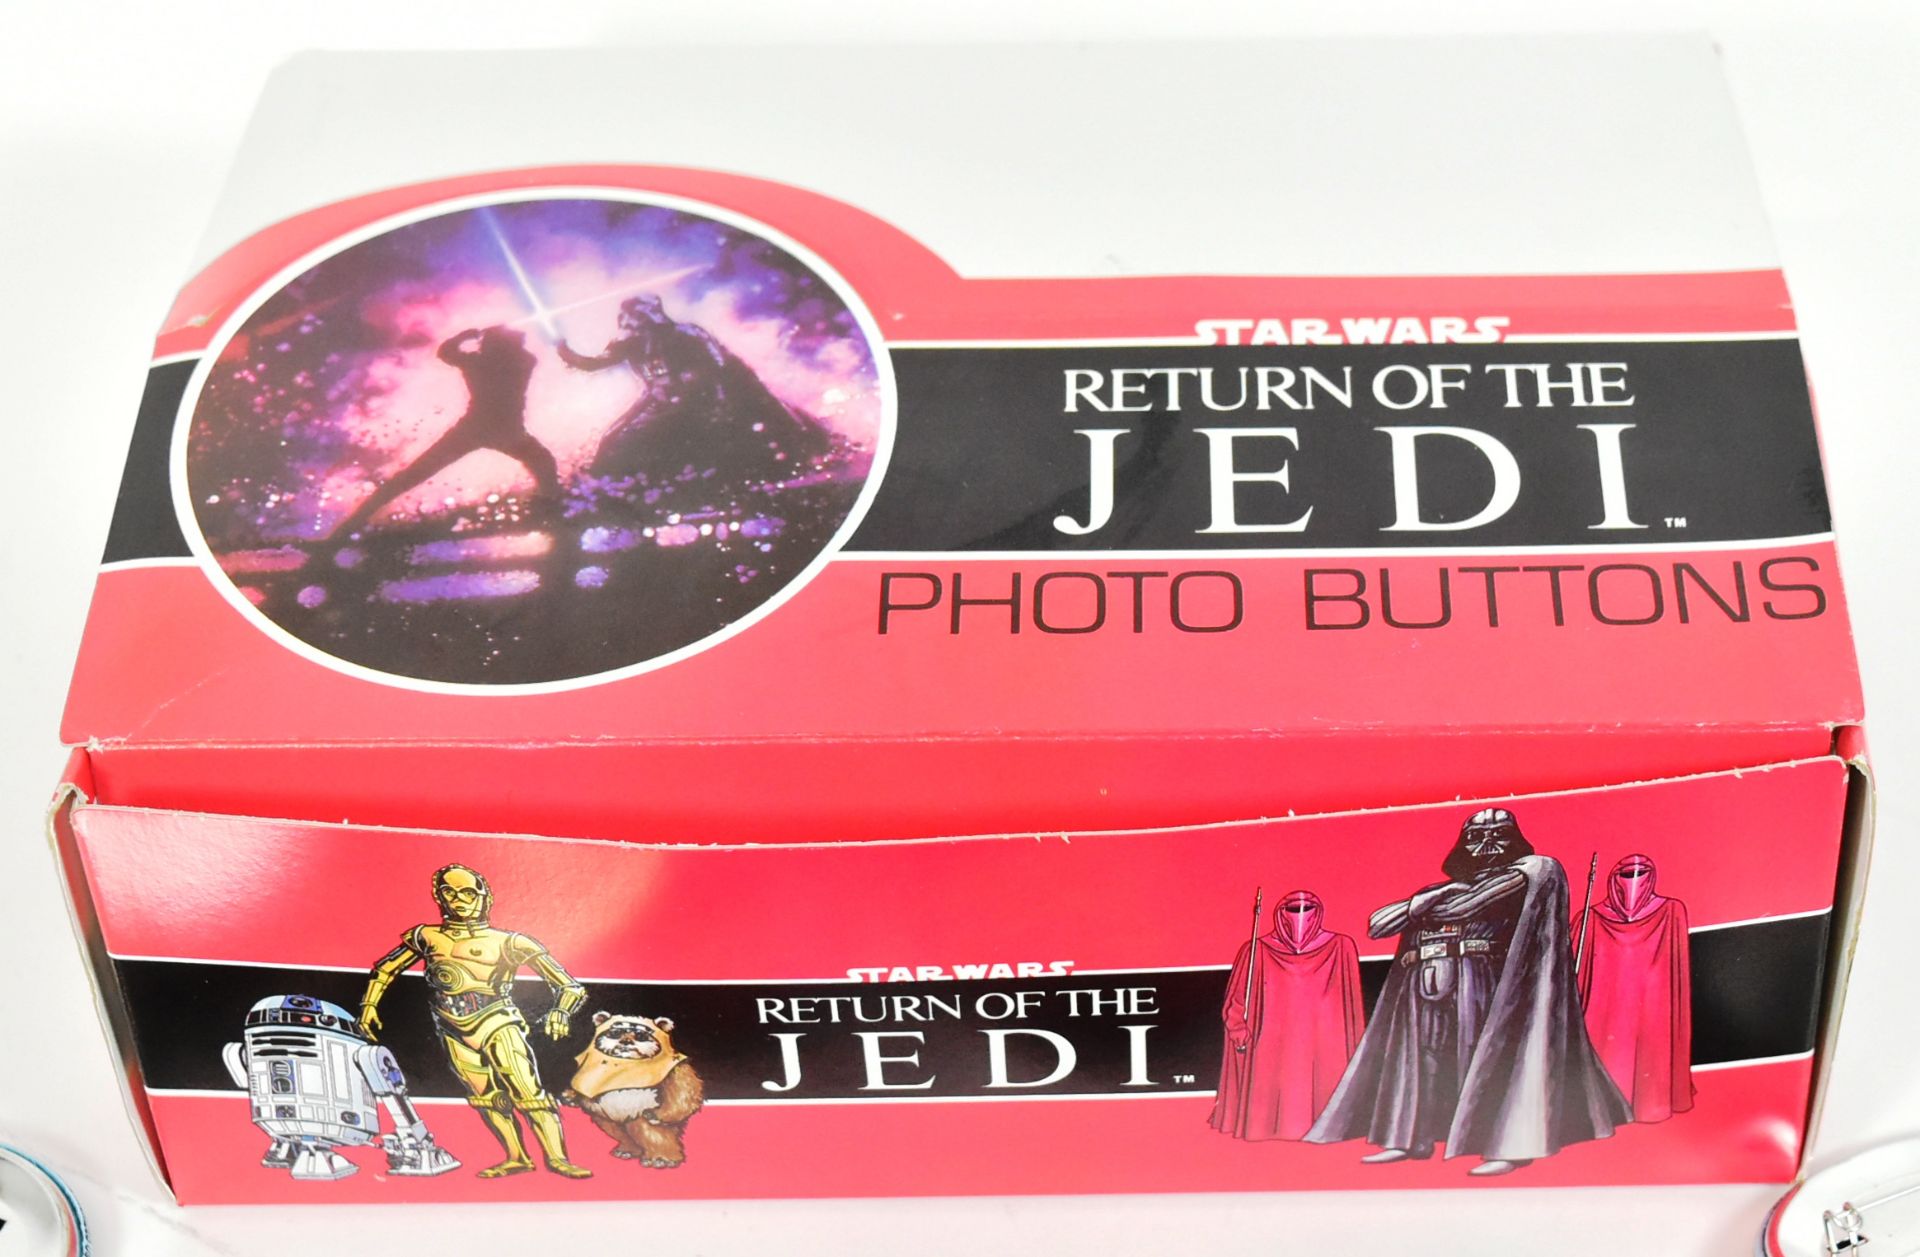 STAR WARS - RETURN OF THE JEDI - COUNTER TOP BADGE DISPLAY - Image 4 of 4